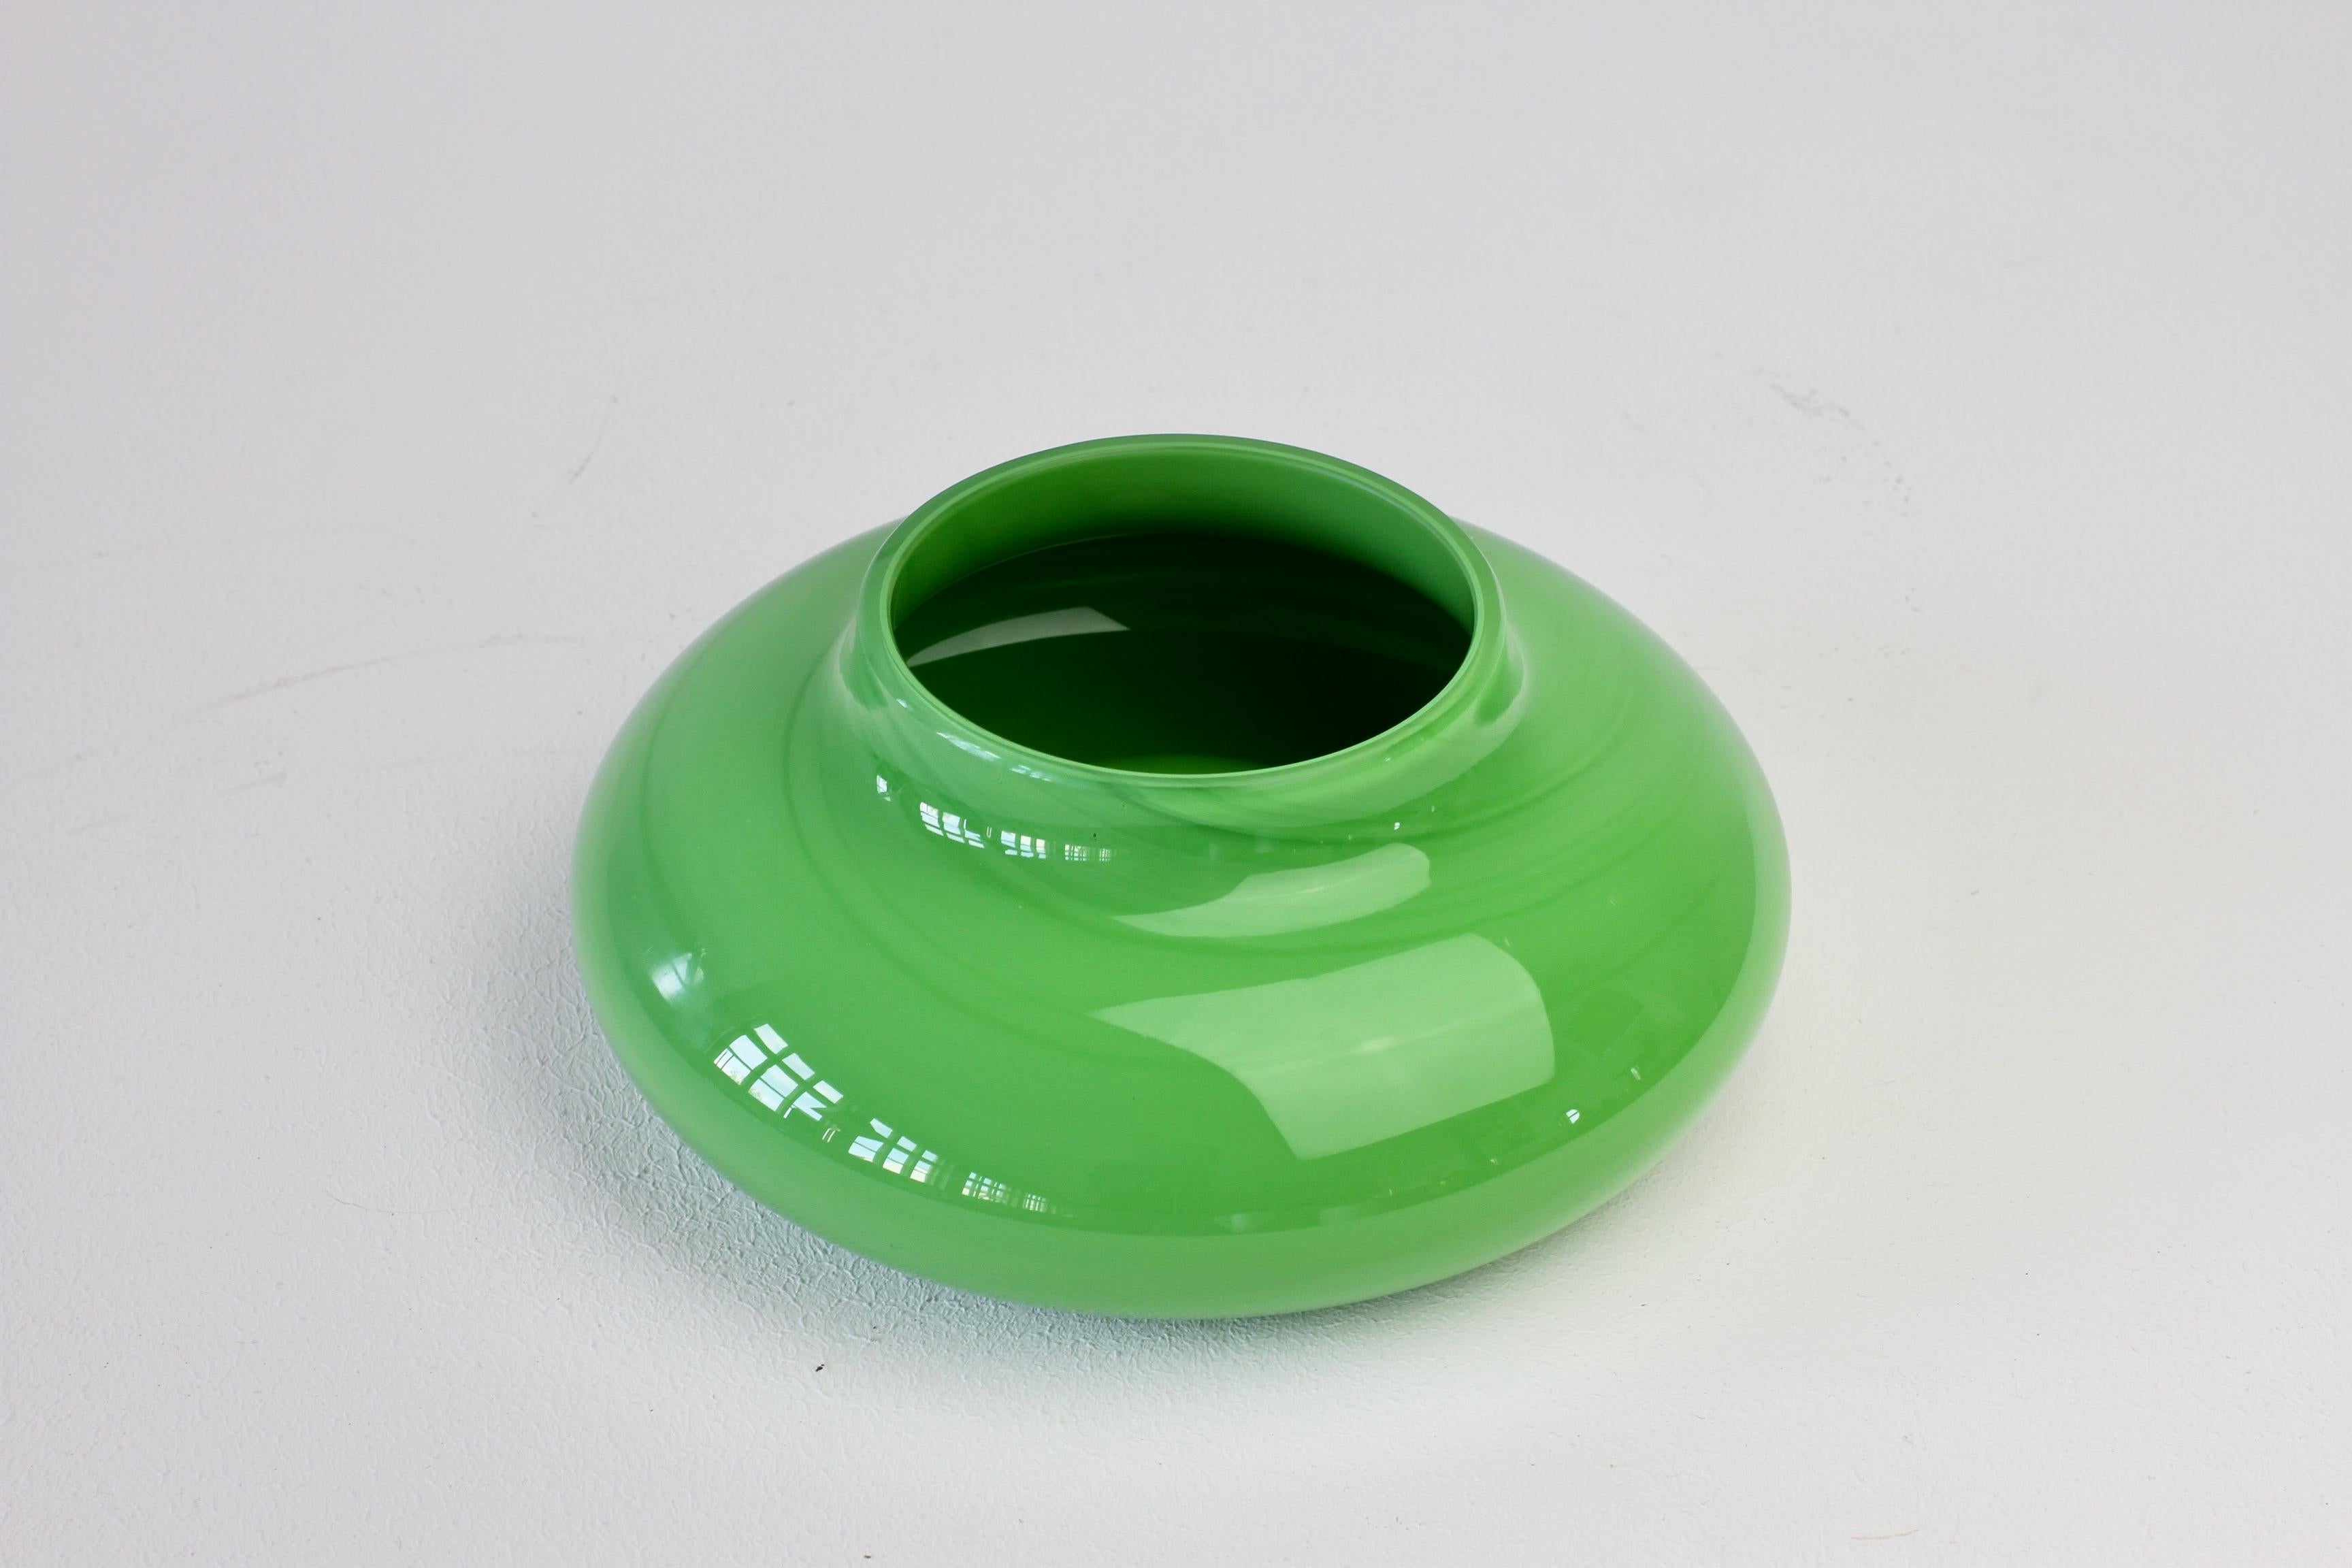 Wonderful vintage Mid-Century Modern glass bowl or vase in green by Cenedese of Murano, Italy. 

This can be used as a bowl or as a vase when turned upside down - perfect for displaying short stemmed decorative flowers.

A fun, funky and bright